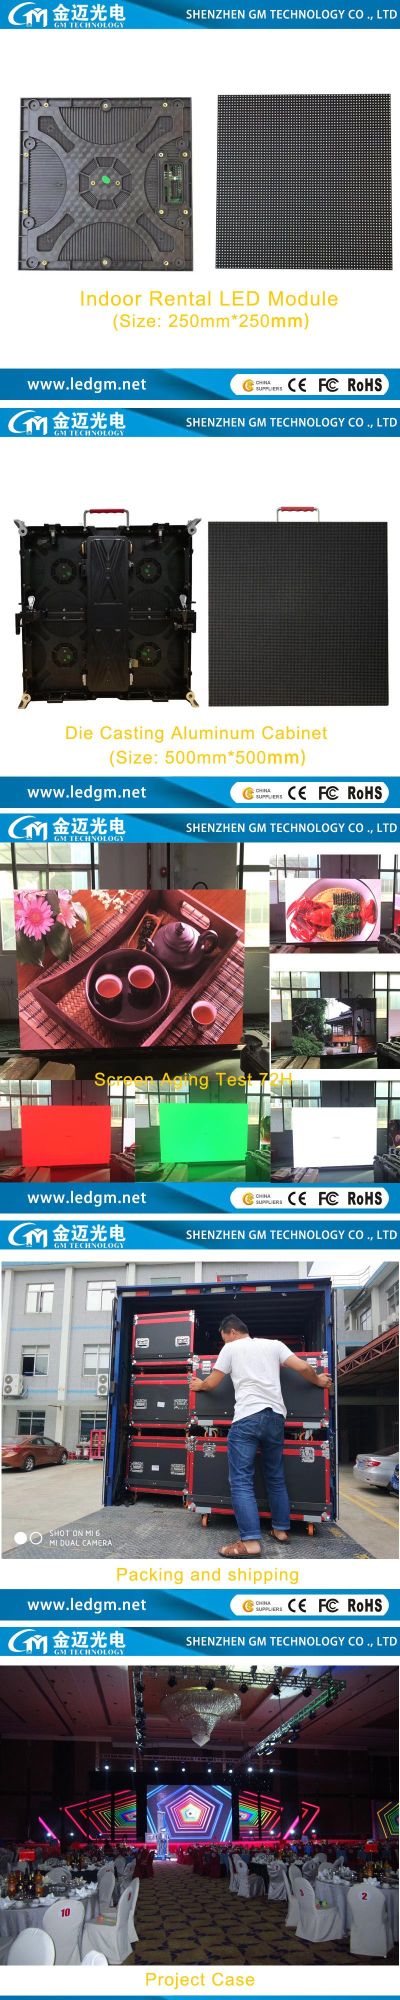 P2.6 High Precision Rental LED Display for Stage Show